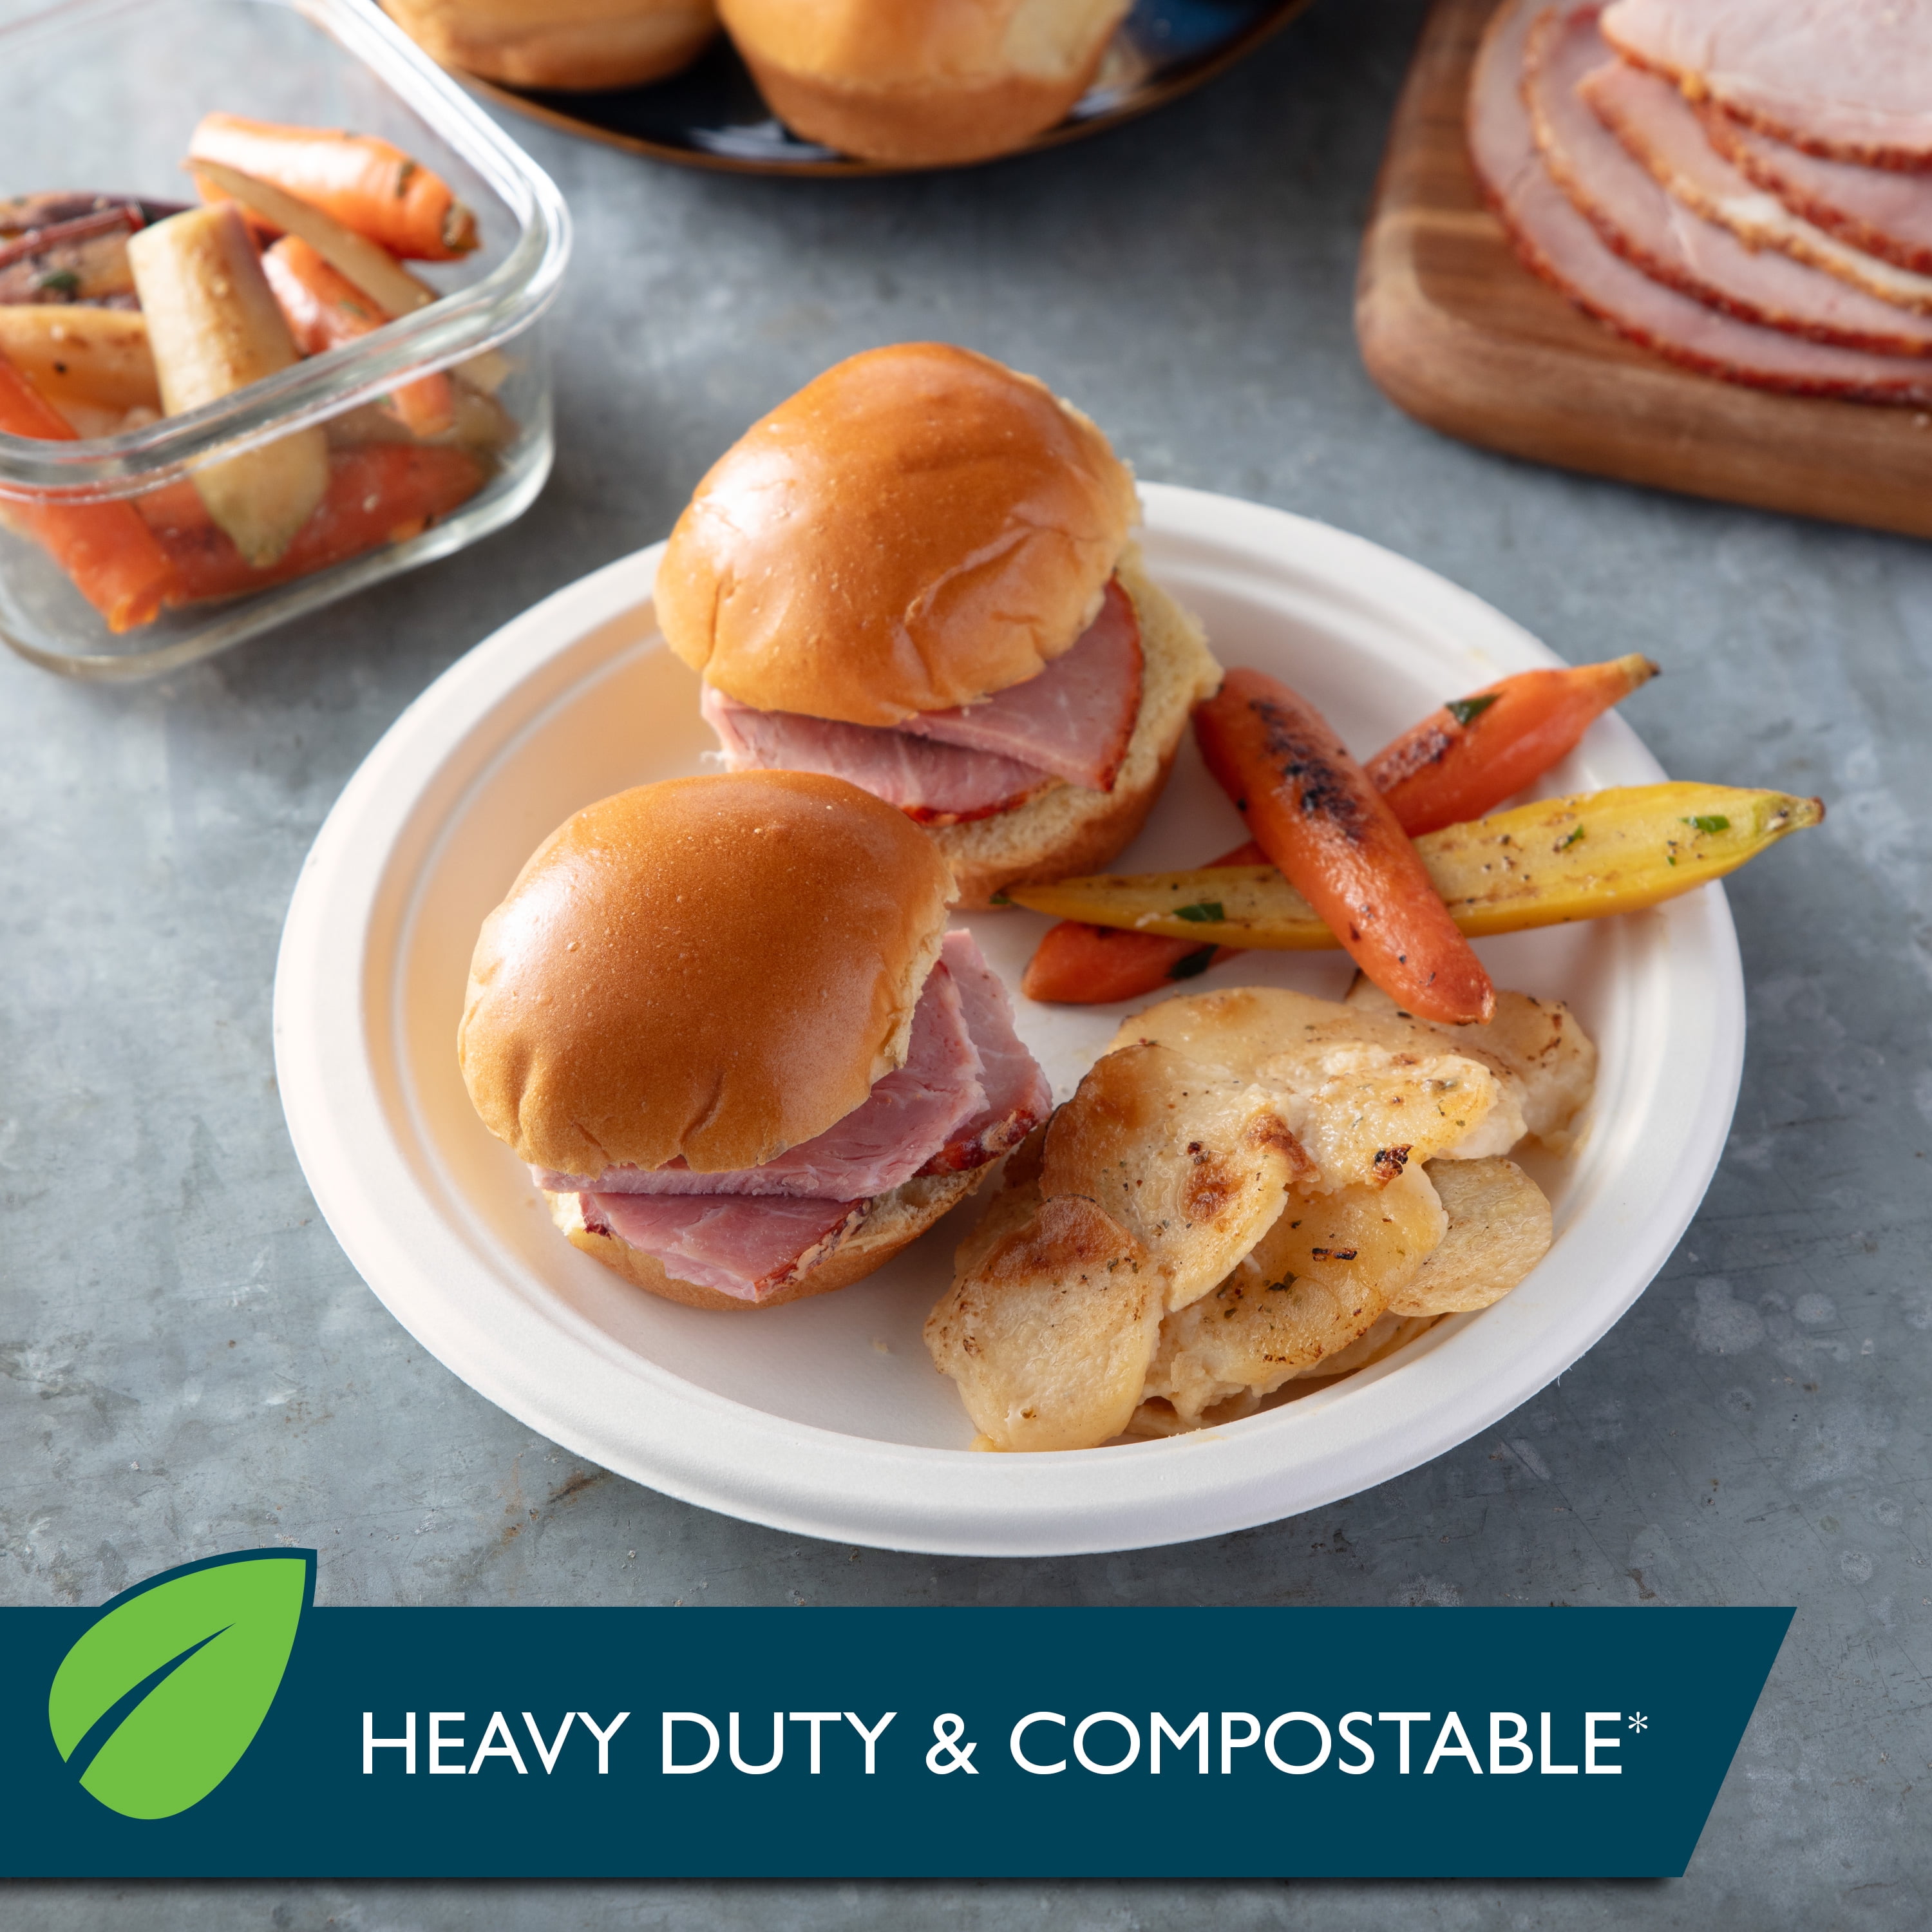 Hefty EcoSave Compostable Compartment Trays, 12 ct - Baker's